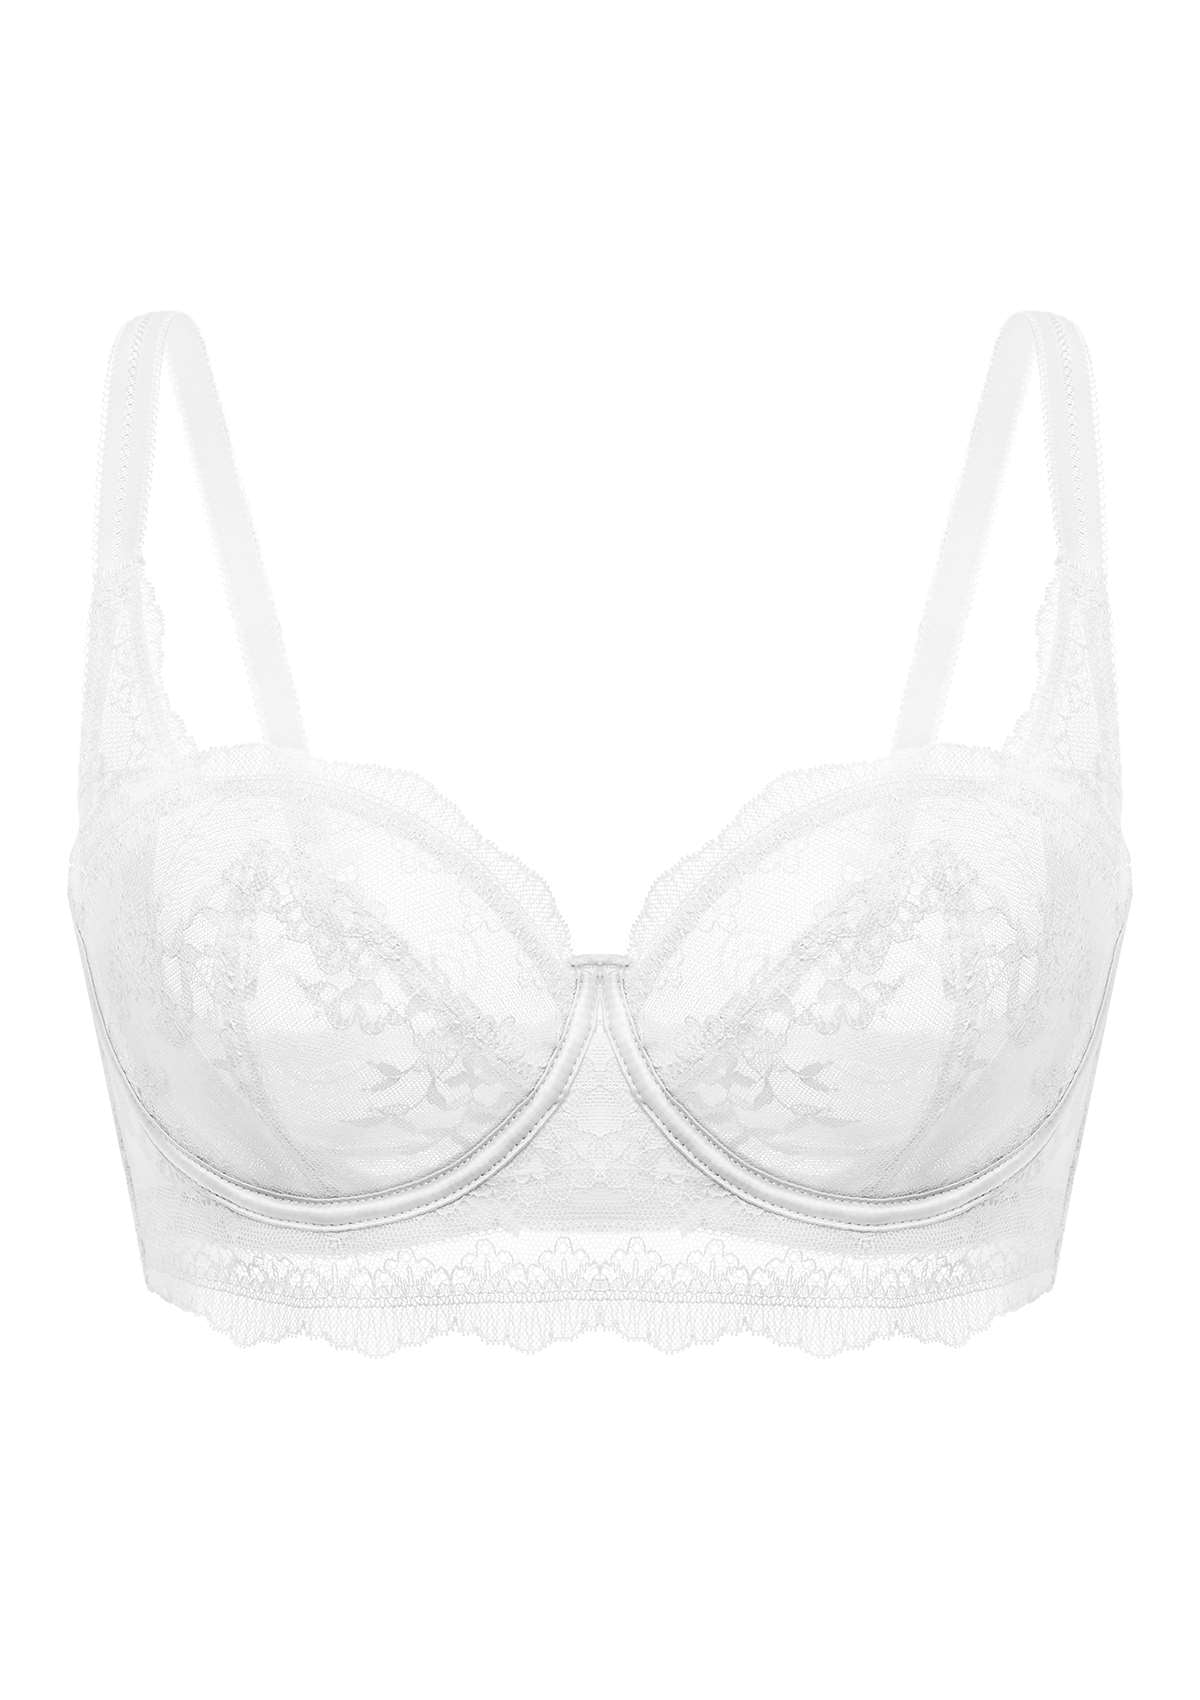 HSIA I Do Floral Lace Bridal Balconette Beautiful Bra For Special Day - Pink / 38 / D